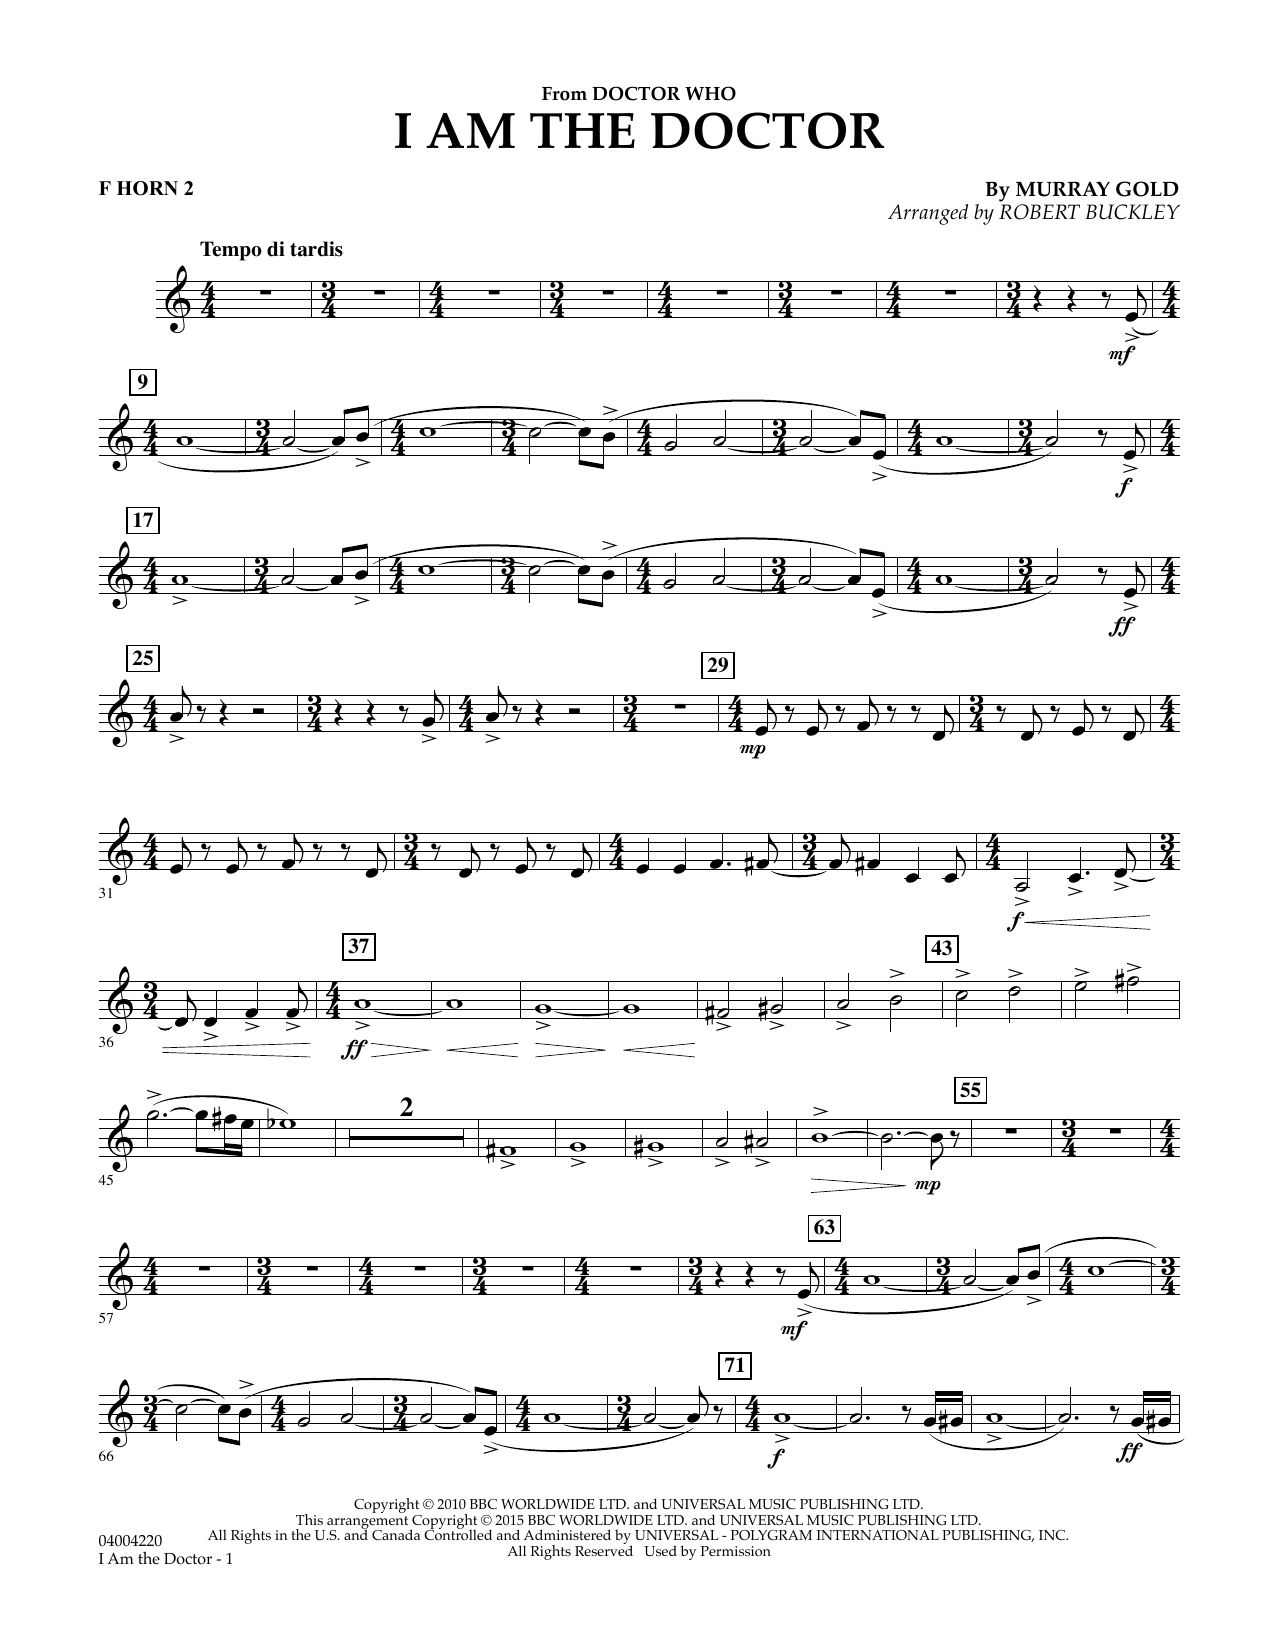 Robert Buckley I Am the Doctor (from Doctor Who) - F Horn 2 sheet music notes and chords. Download Printable PDF.